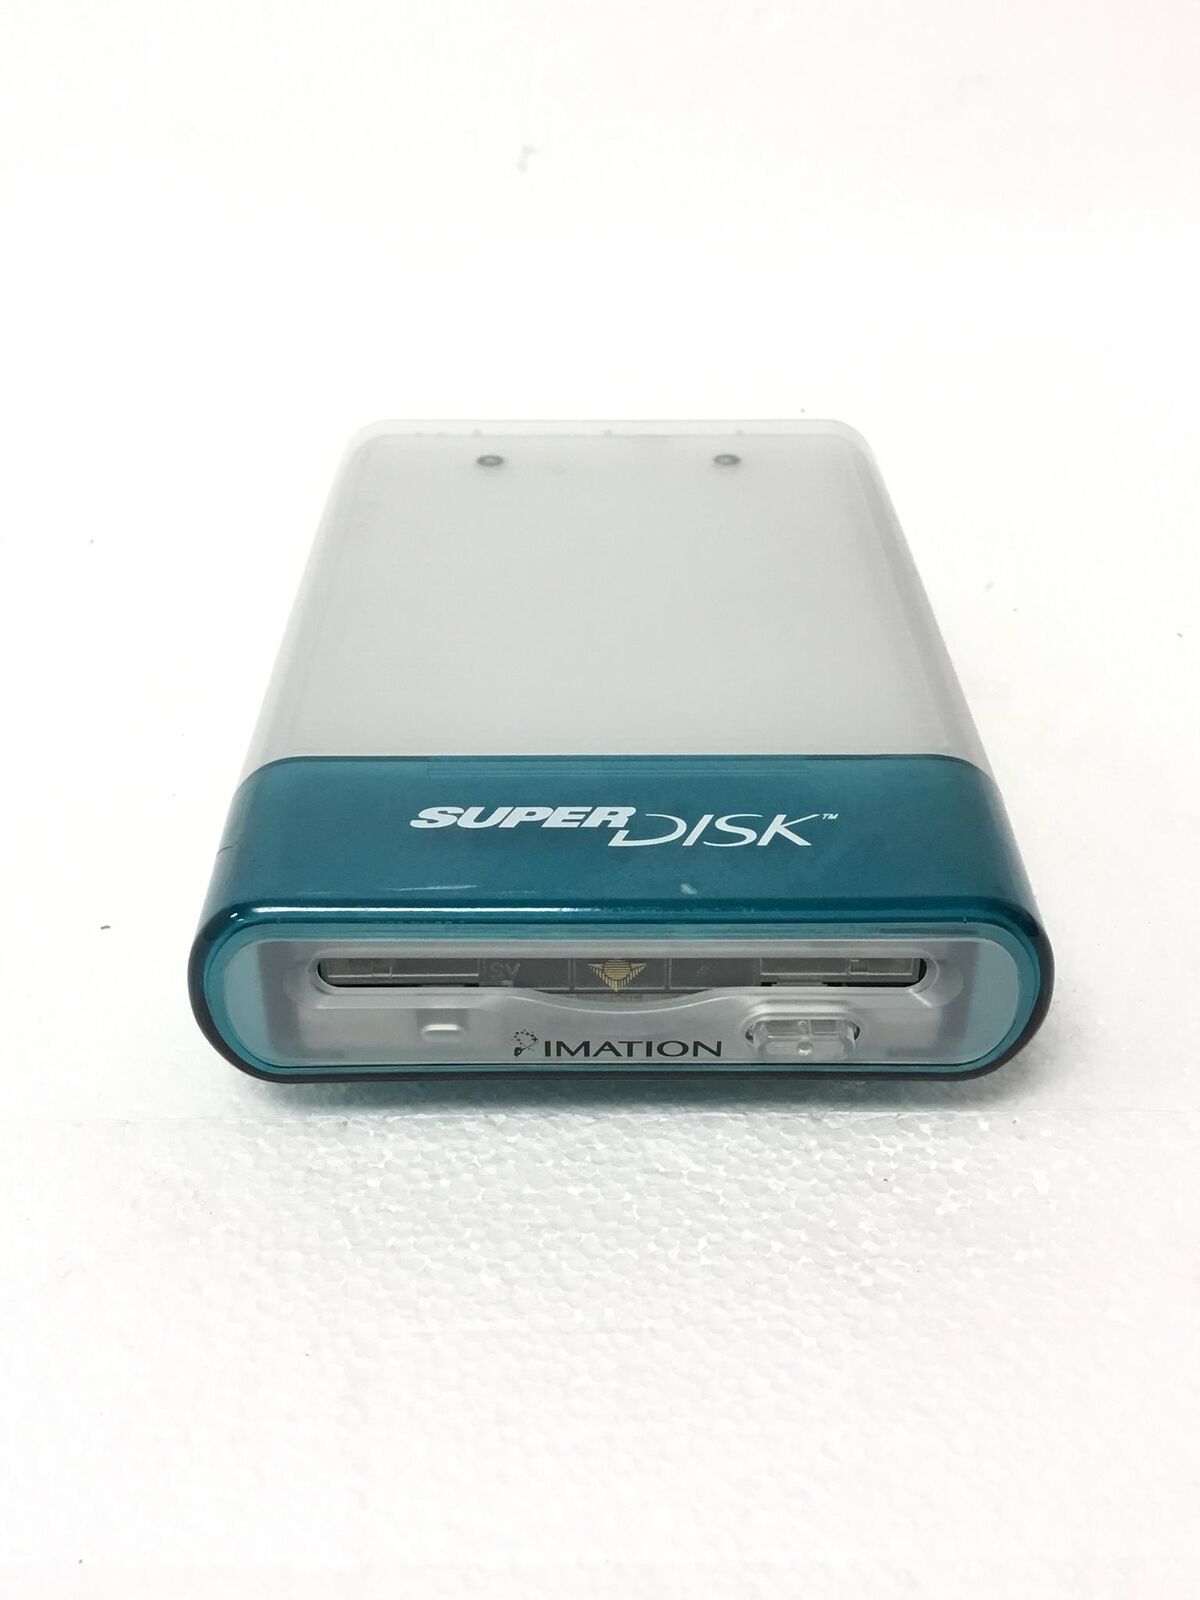 IMATION SUPERDISK SD-USB-M USB Drive, No AC Adapter, WORKING, 